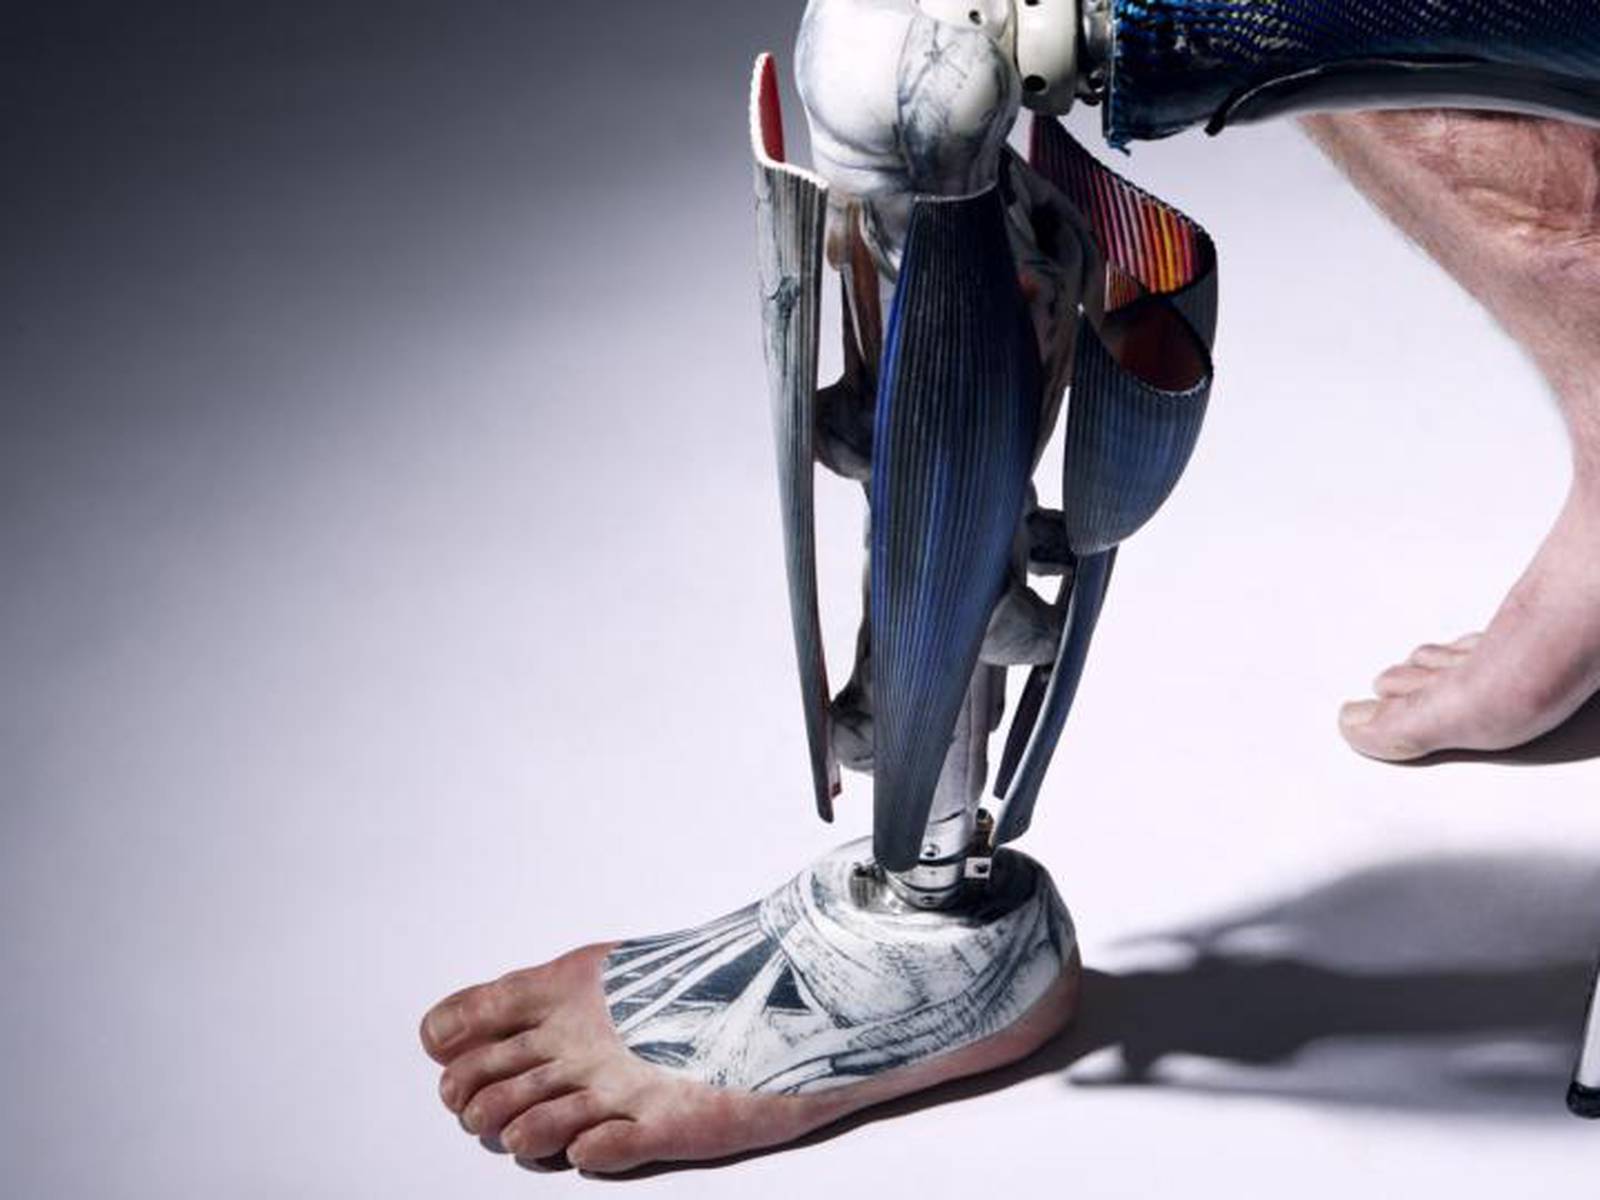 Stylish Prosthetic Limbs Boost Amputees' Quality of Life